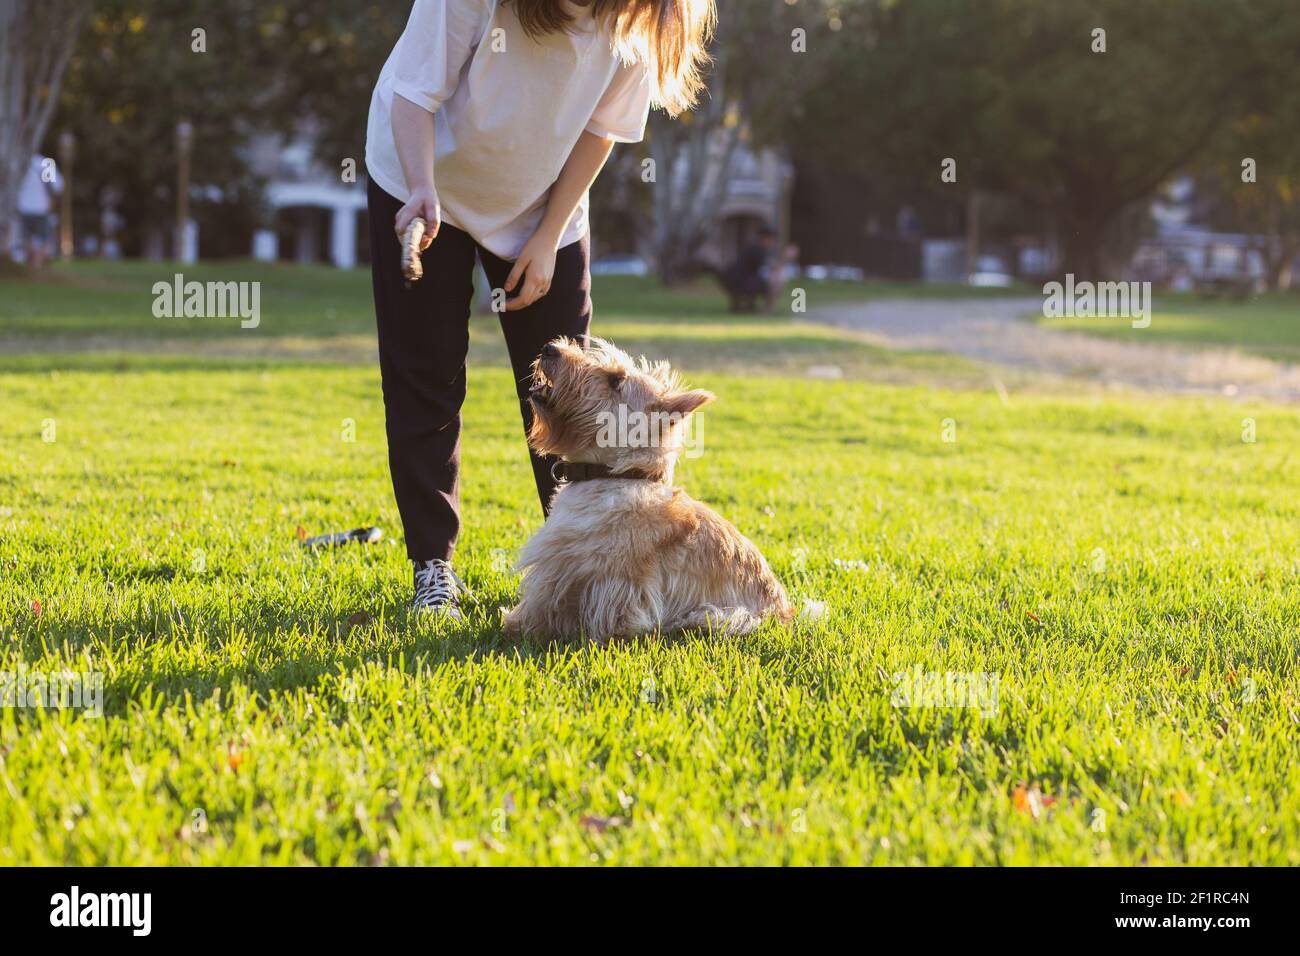 A girl plays with her dog in a Buenos Aires city park Stock Photo